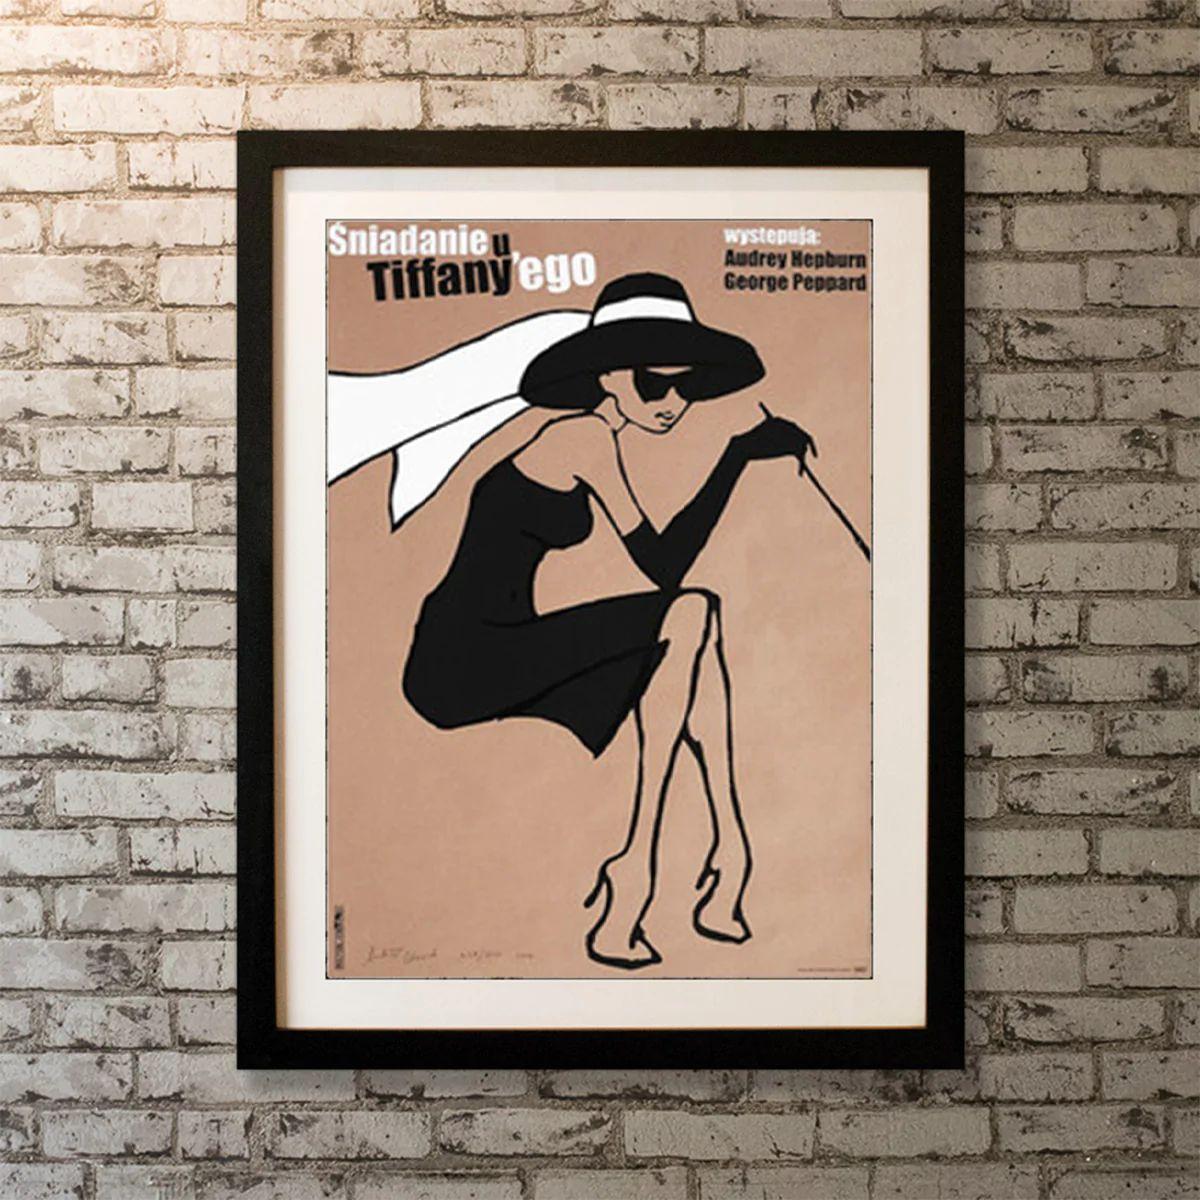 Breakfast at Tiffany's, Unframed Poster, 2015r by Michal Ksiazek

Michal Ksiazek's artists's print inspired by film with Audrey Hepburn. Screen print on brown packaging paper with horizontal strips in paper structure. Limited, signed and numbered